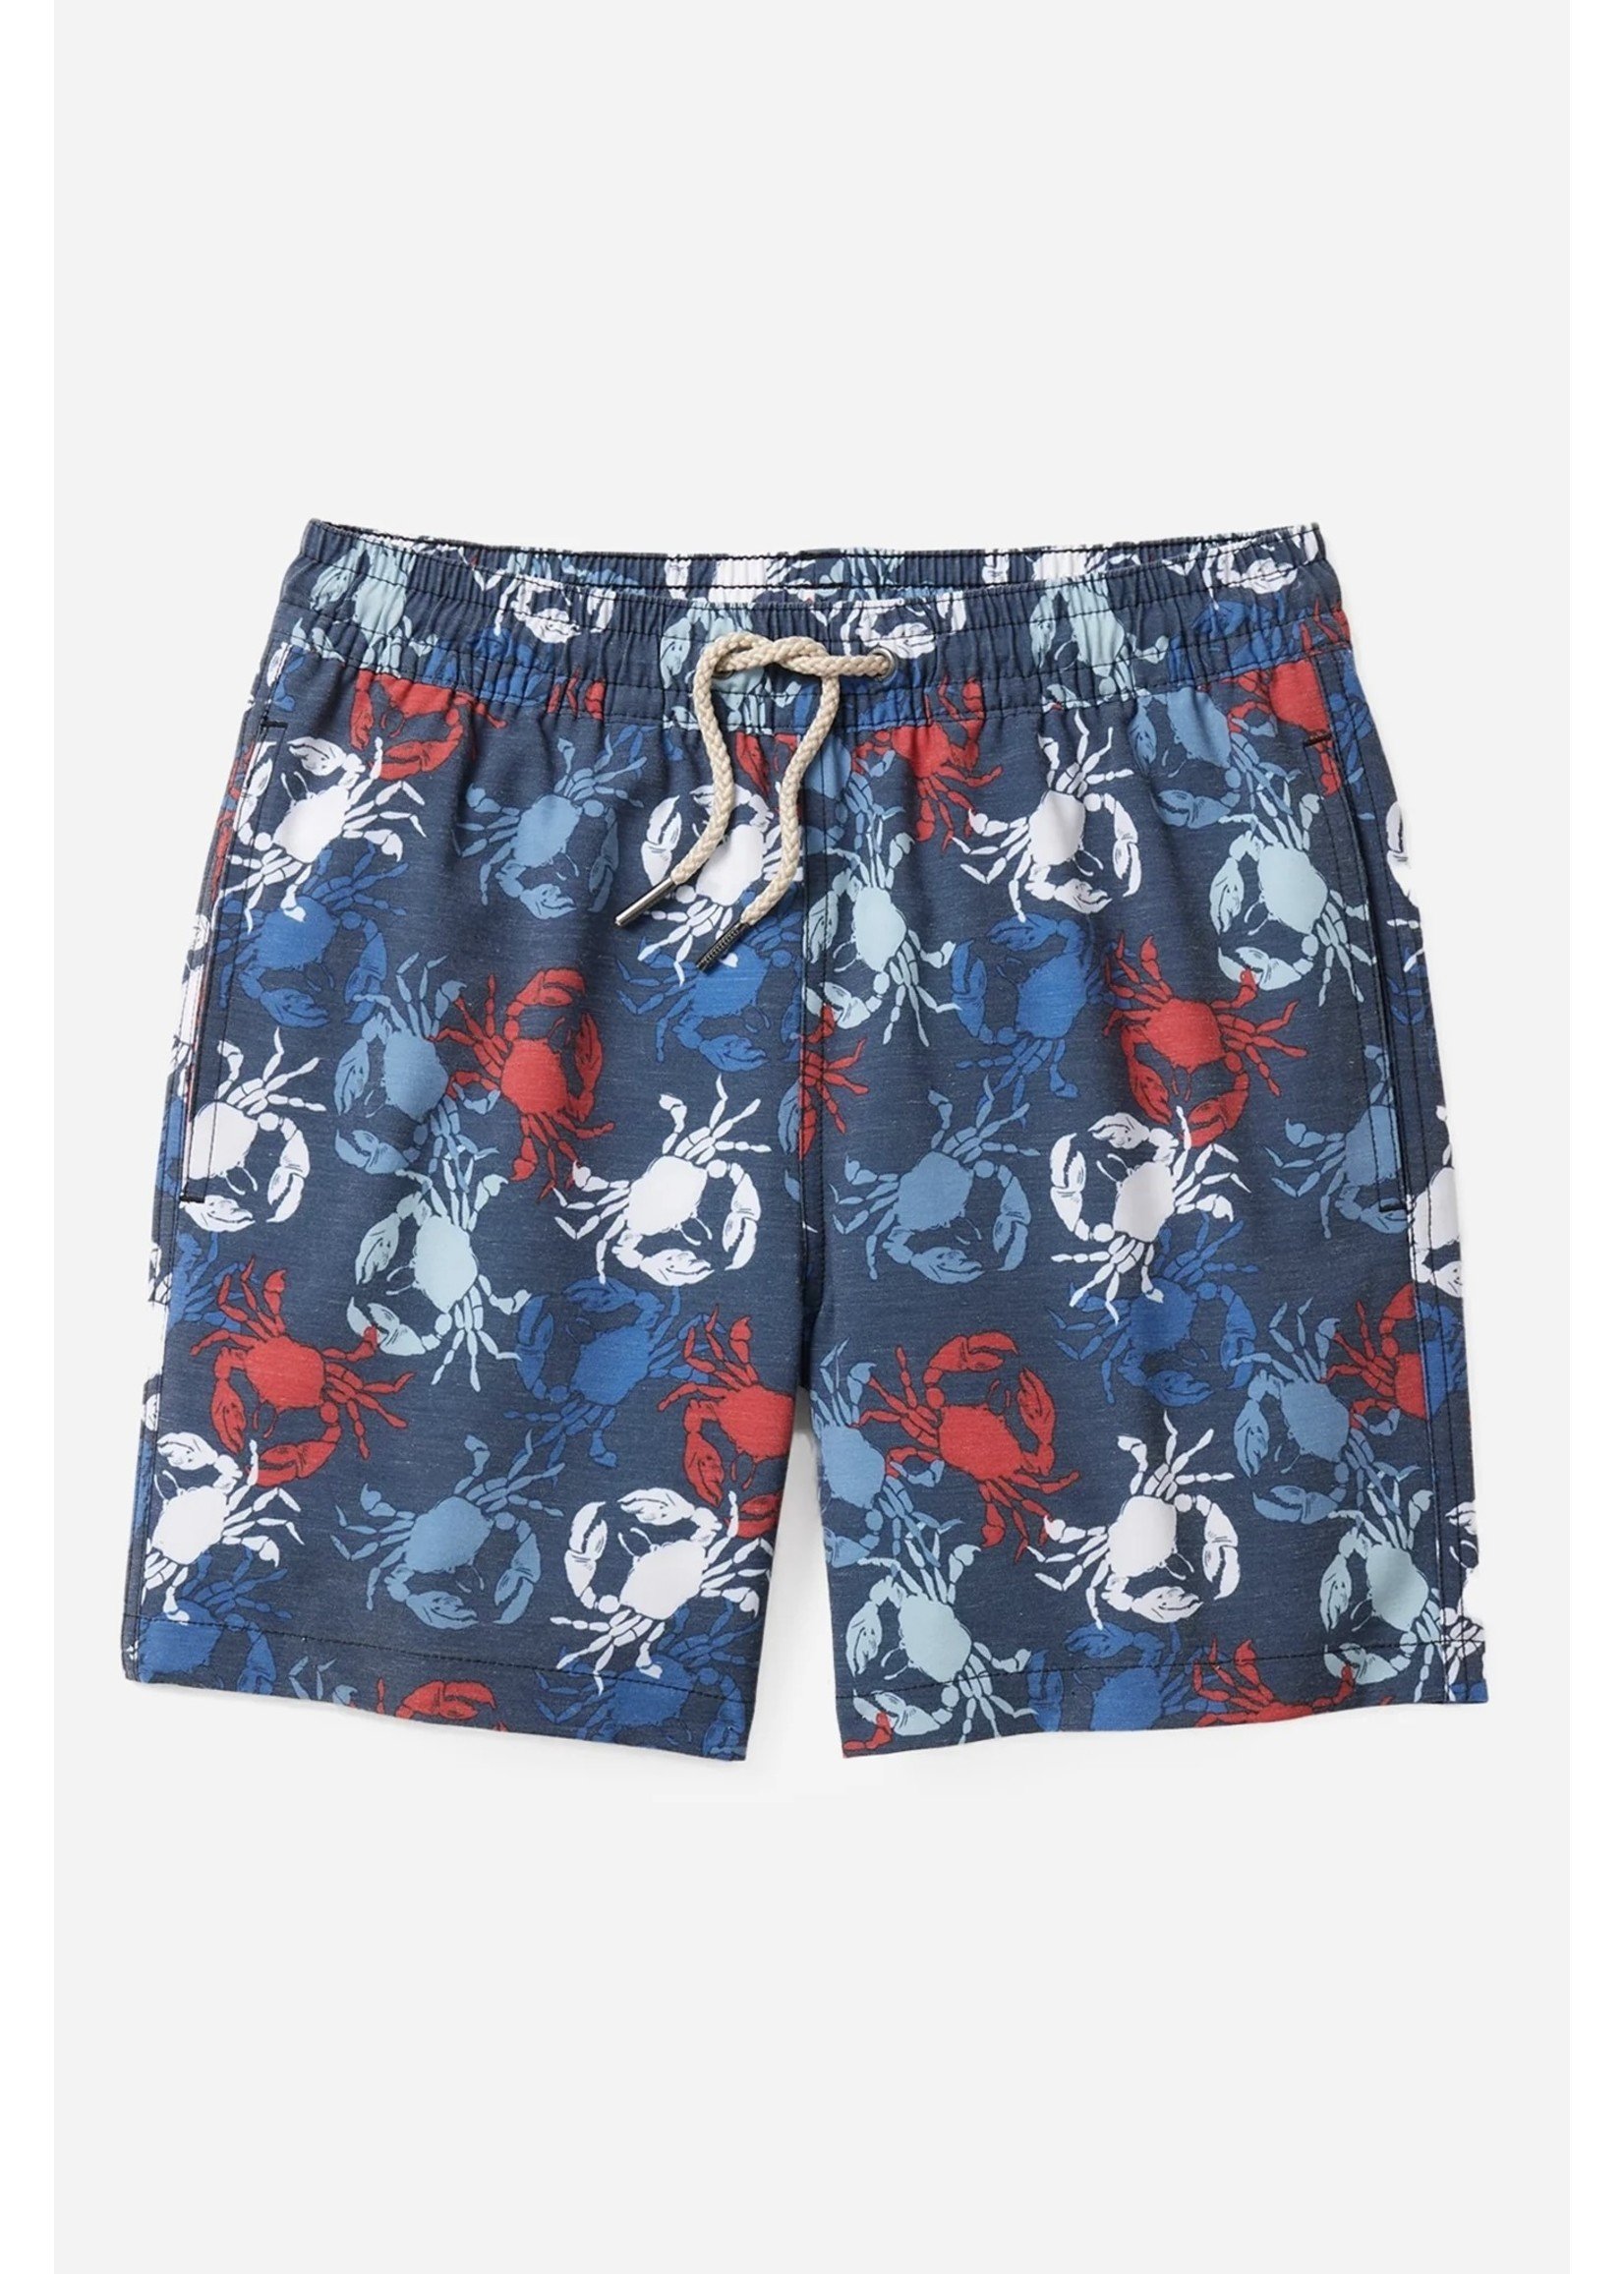 Fair Harbor Youth Bayberry Trunk